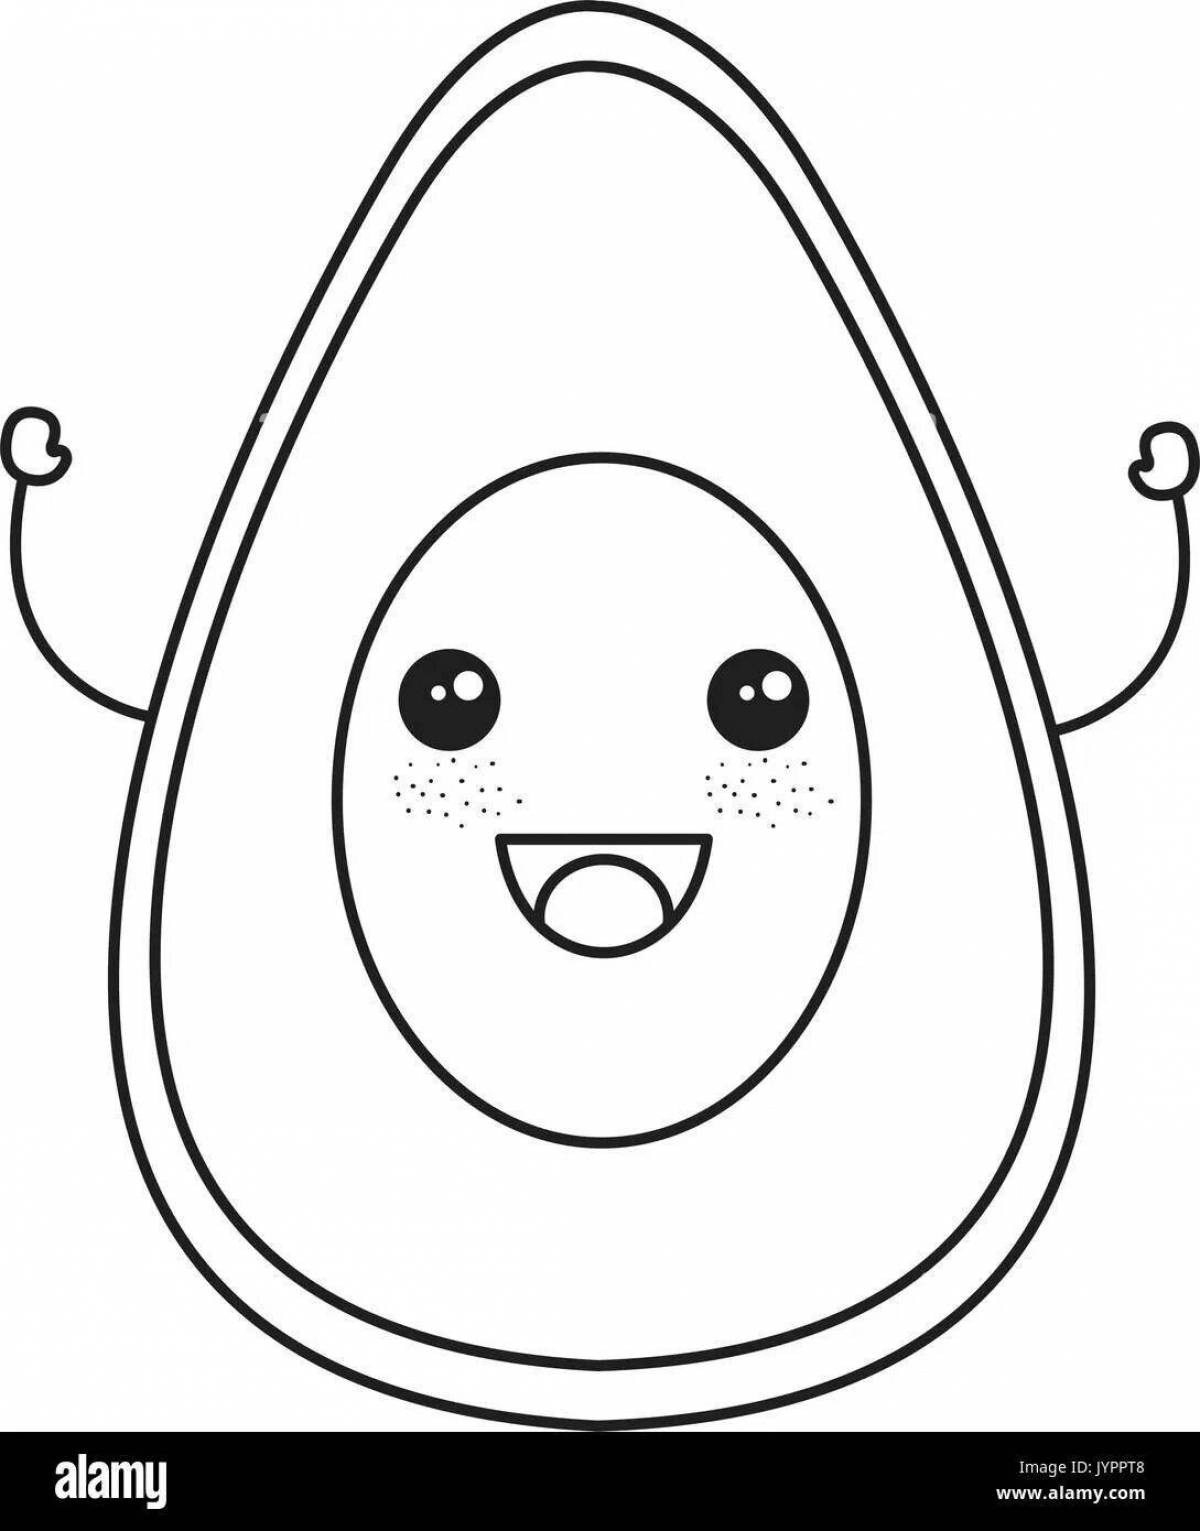 Amazing avocado coloring page for girls